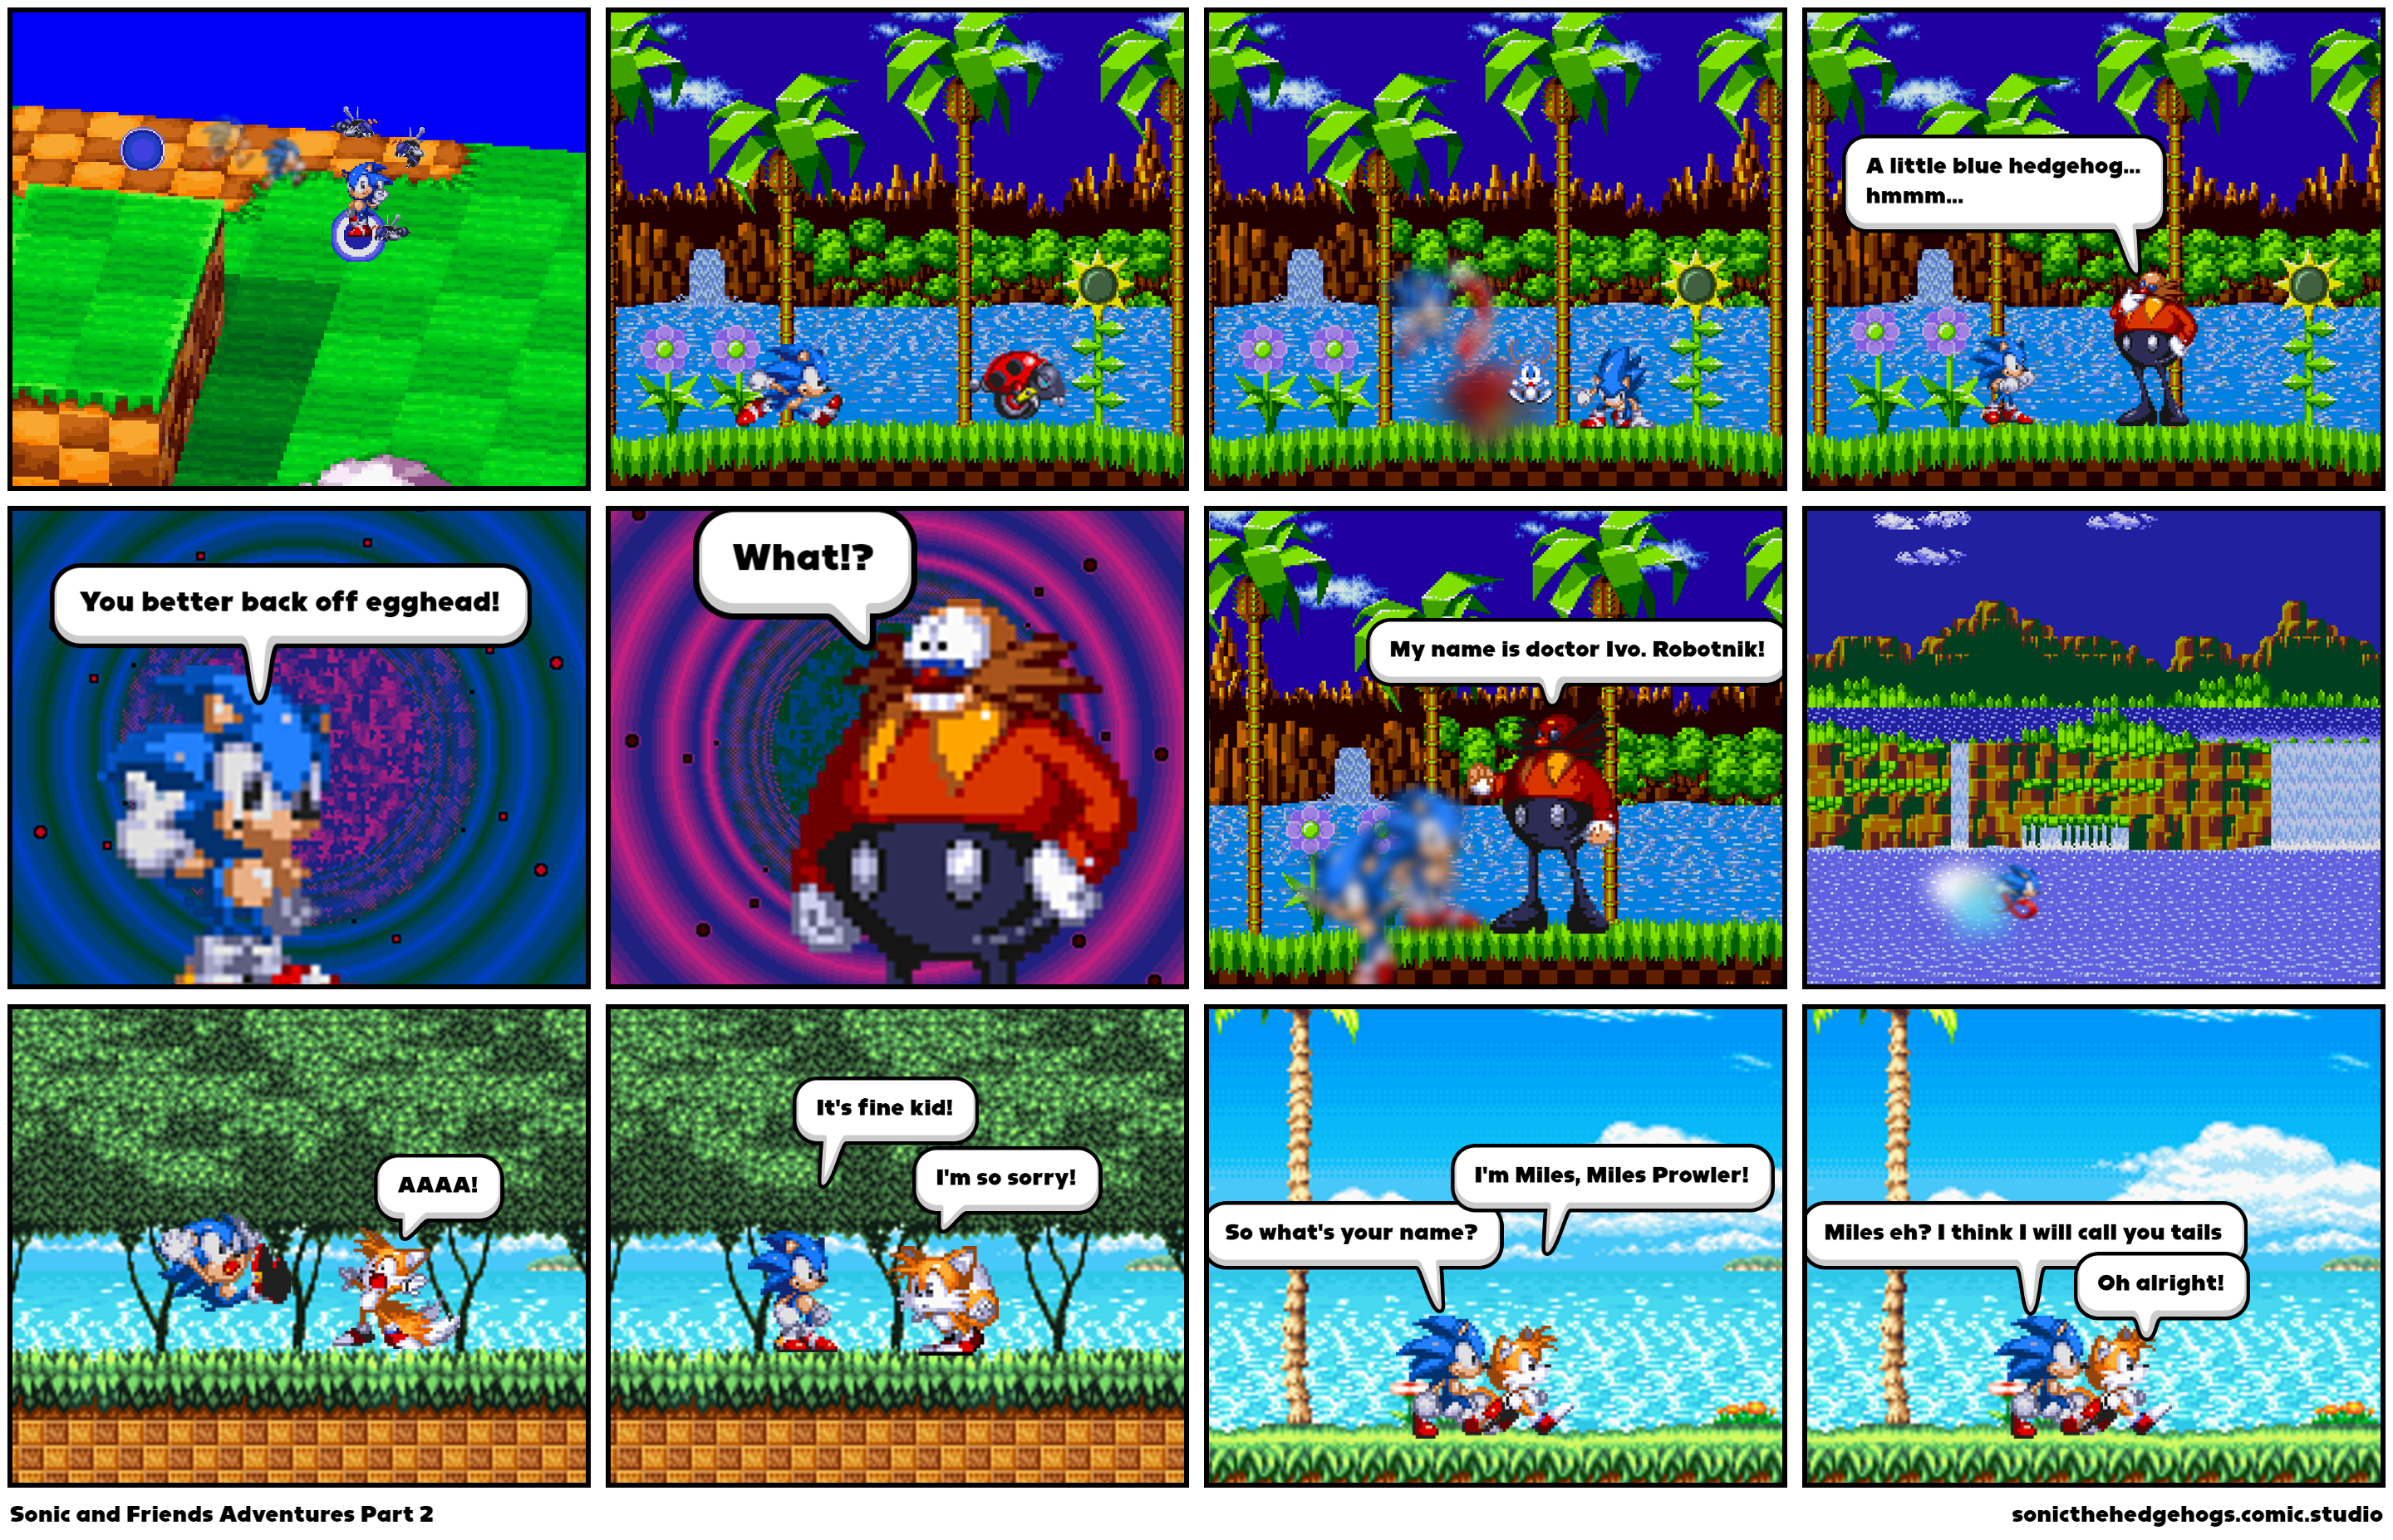 Sonic and Friends Adventures Part 2 